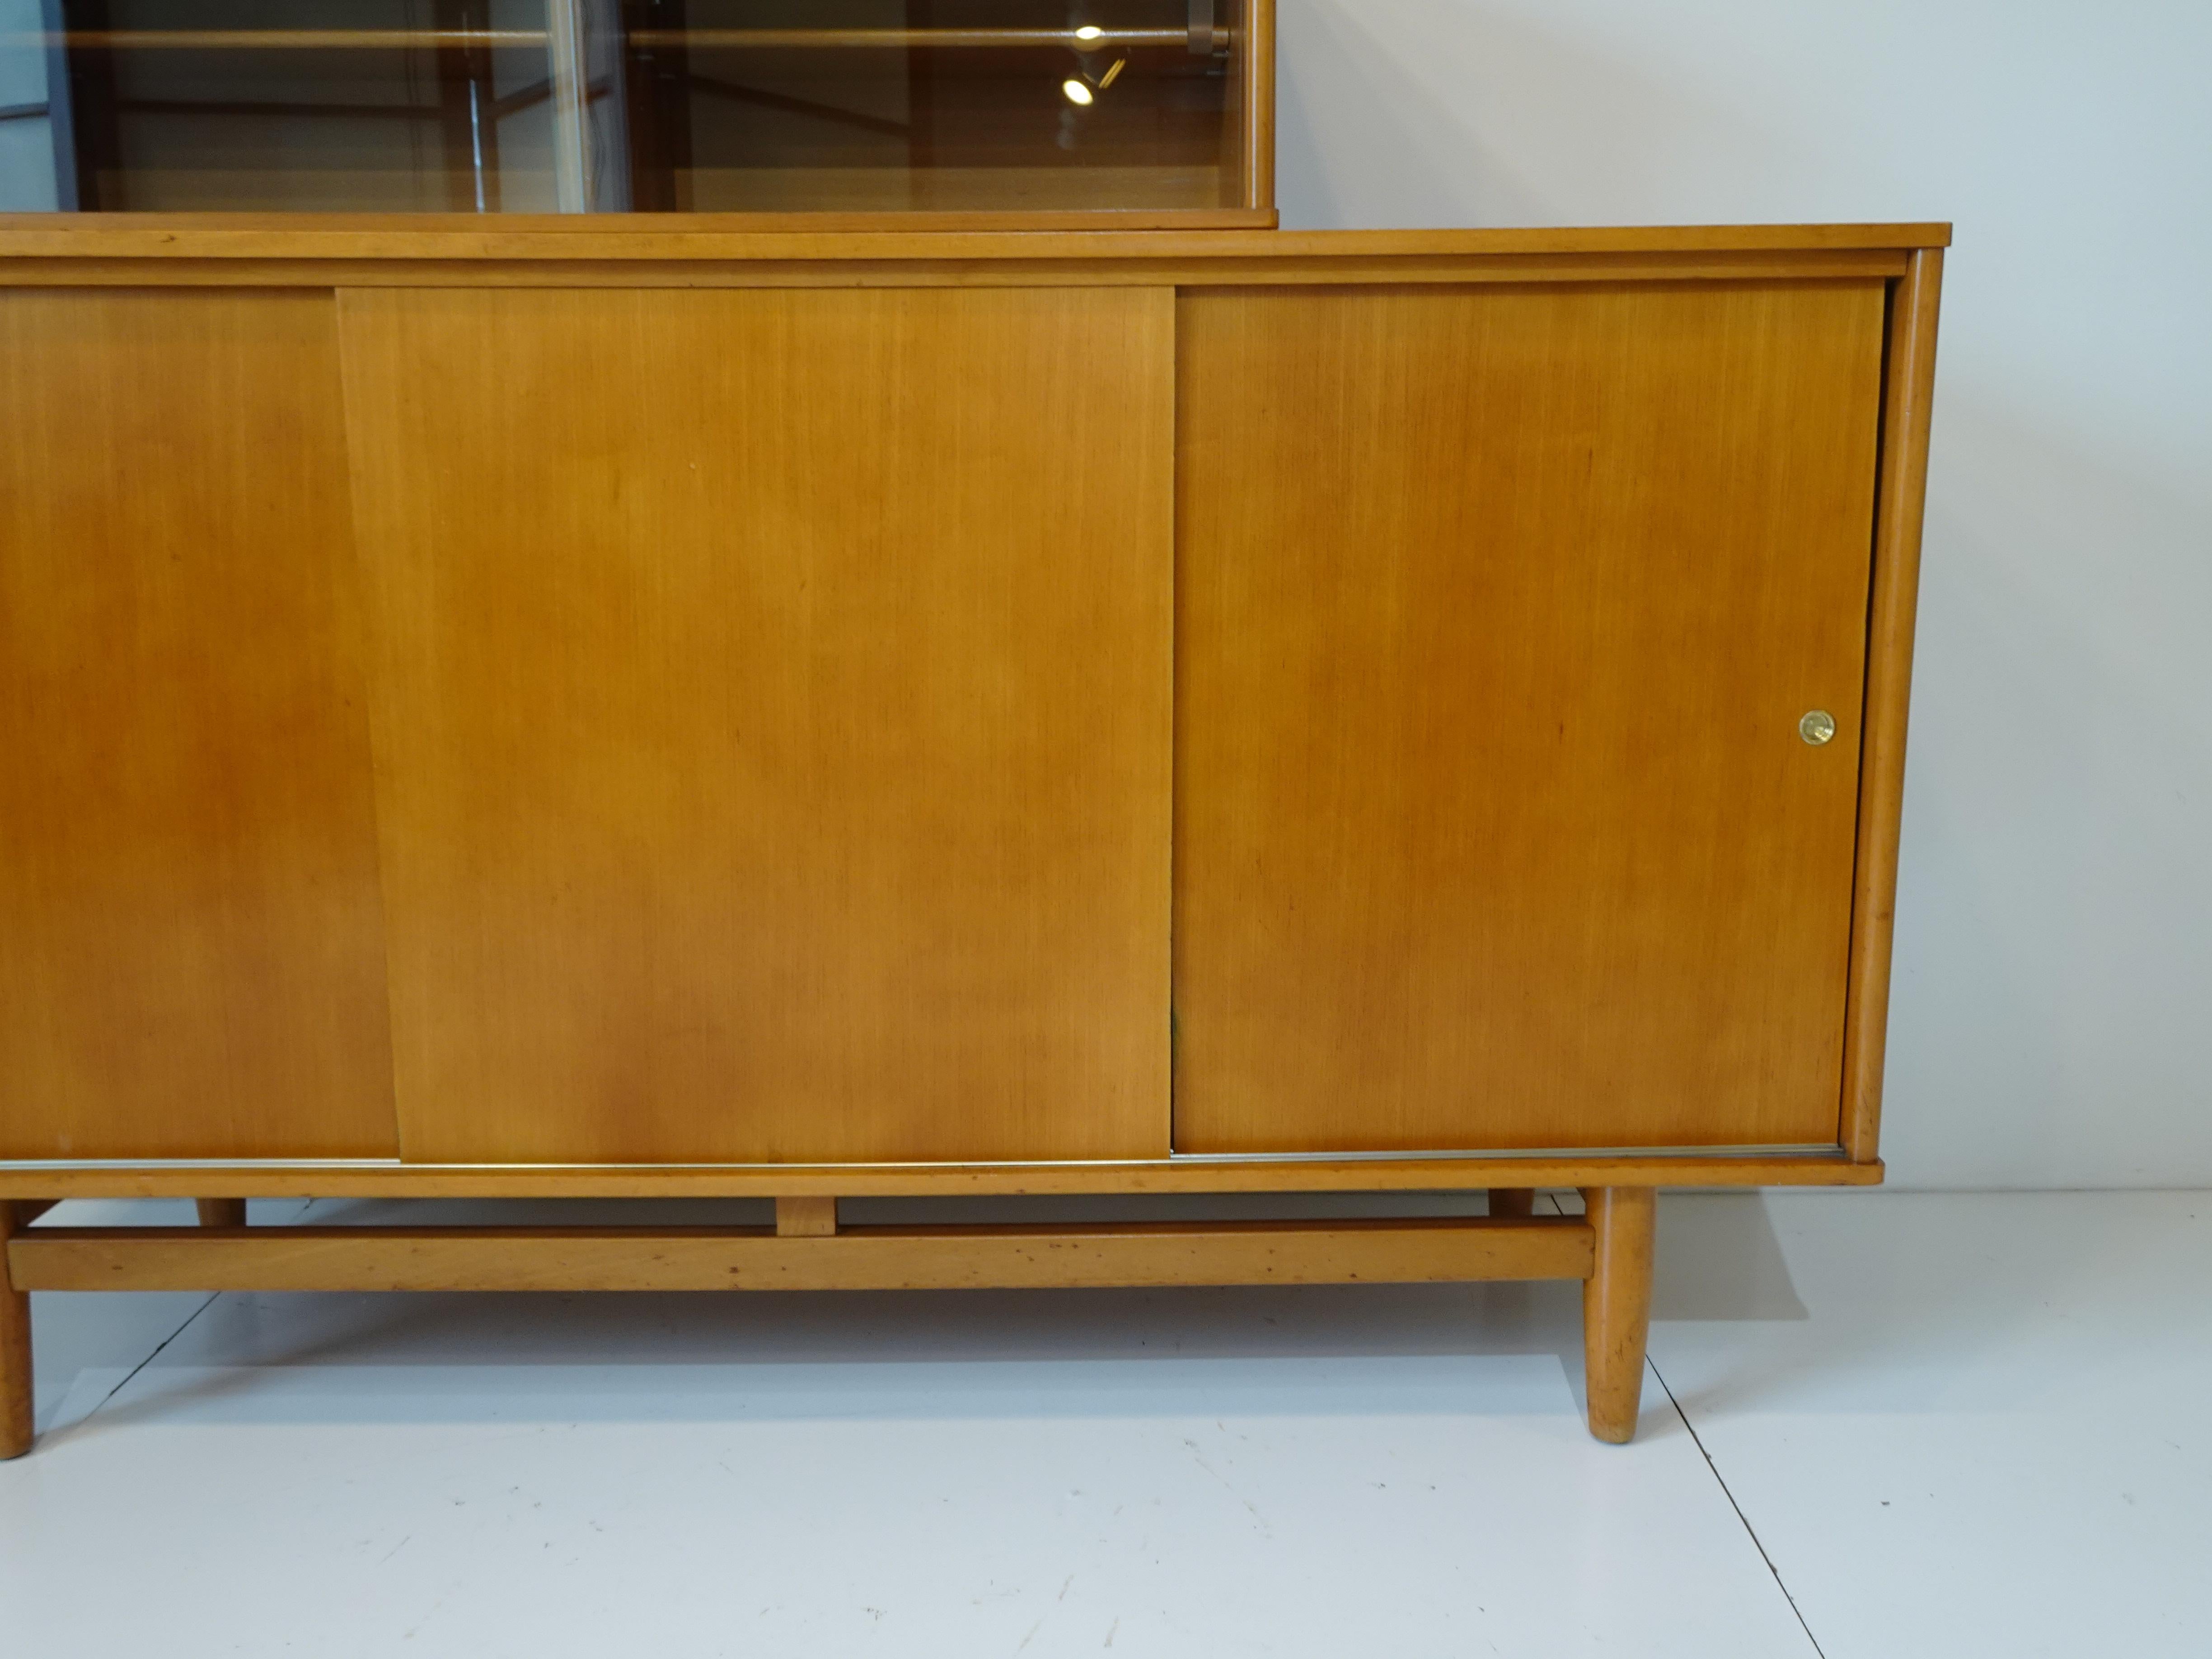 Mahogany Early Milo Baughman Credenza / Sideboard for Drexel Todays Living